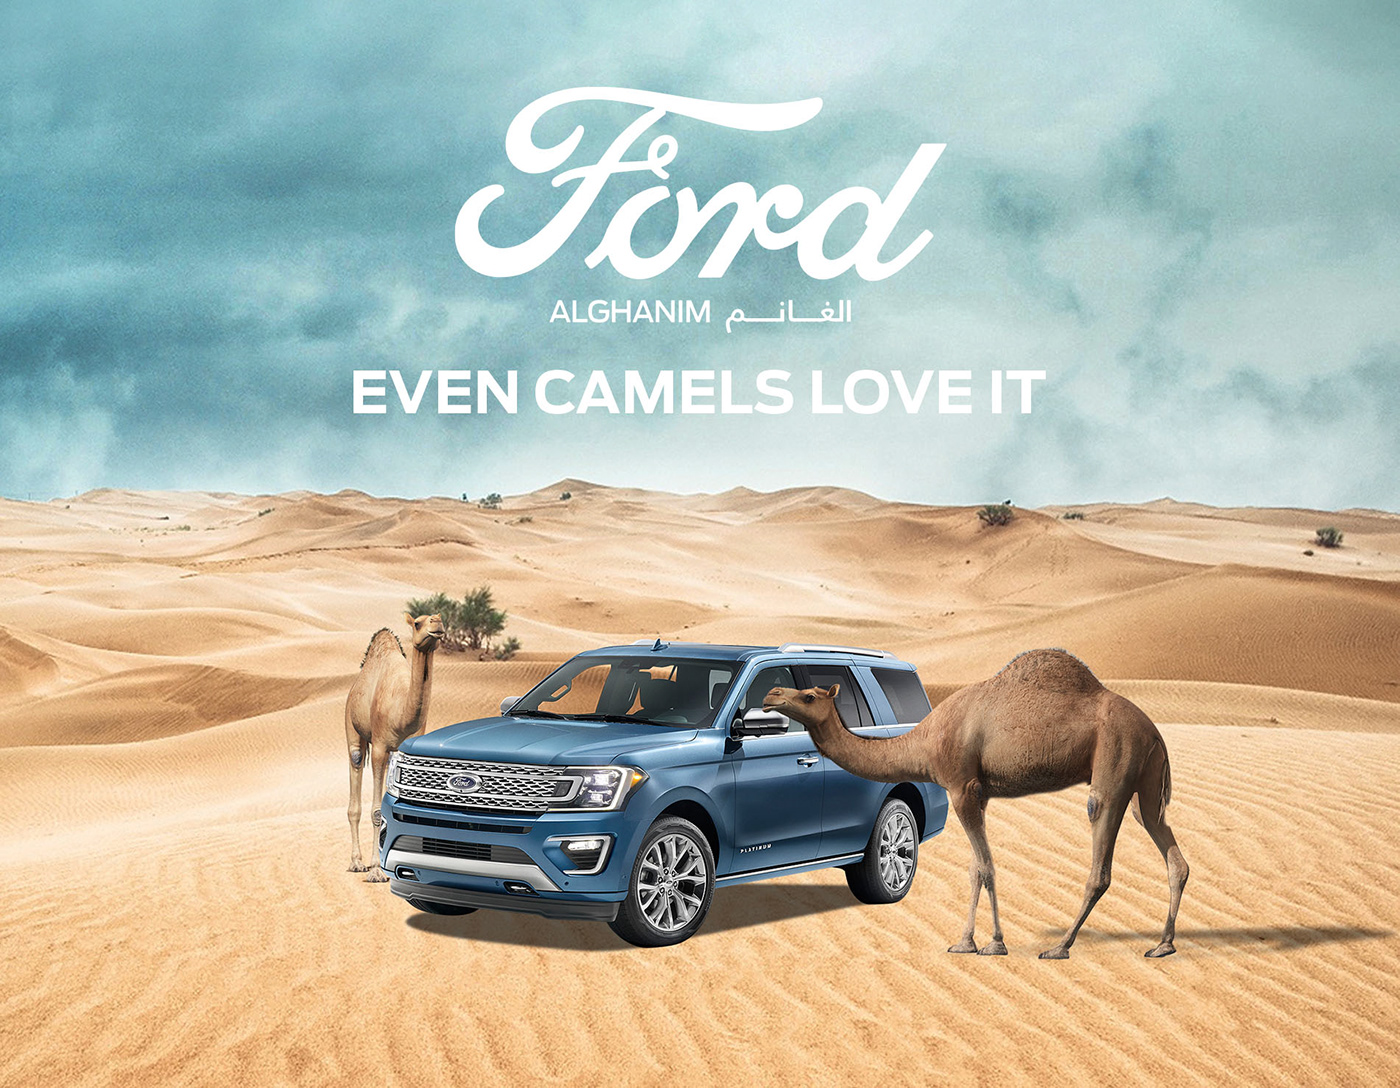 4x4 ahmedwaheib automotive   camels carphotography expedition Ford fordAlghanim Kuwait Offroad